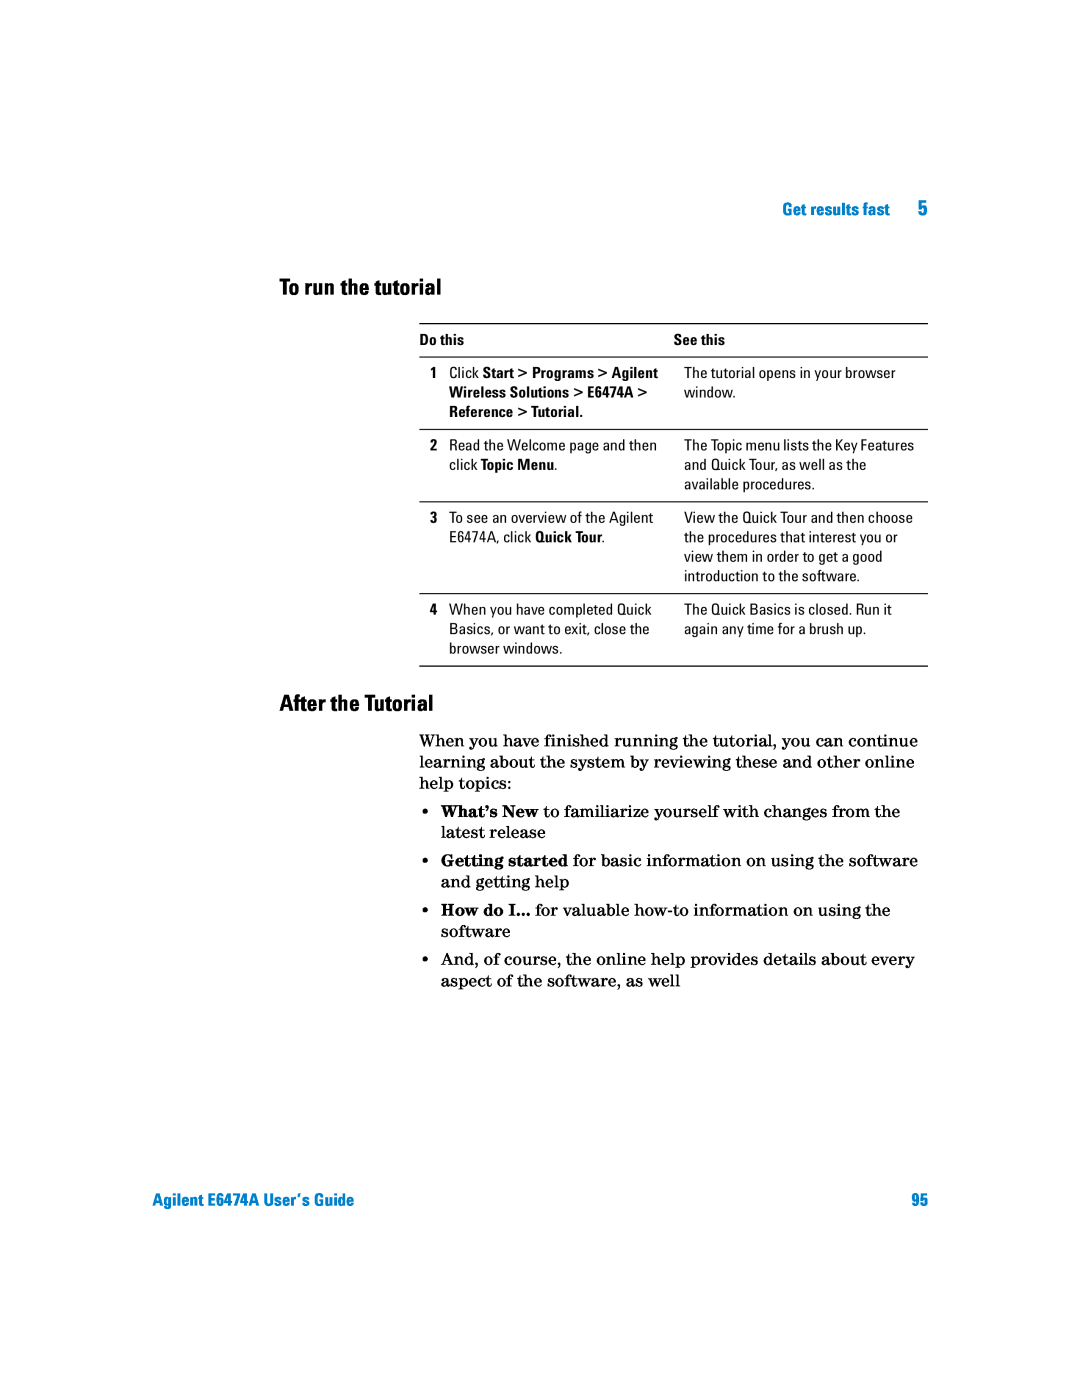 Agilent Technologies manual To run the tutorial, After the Tutorial, Agilent E6474A User’s Guide 